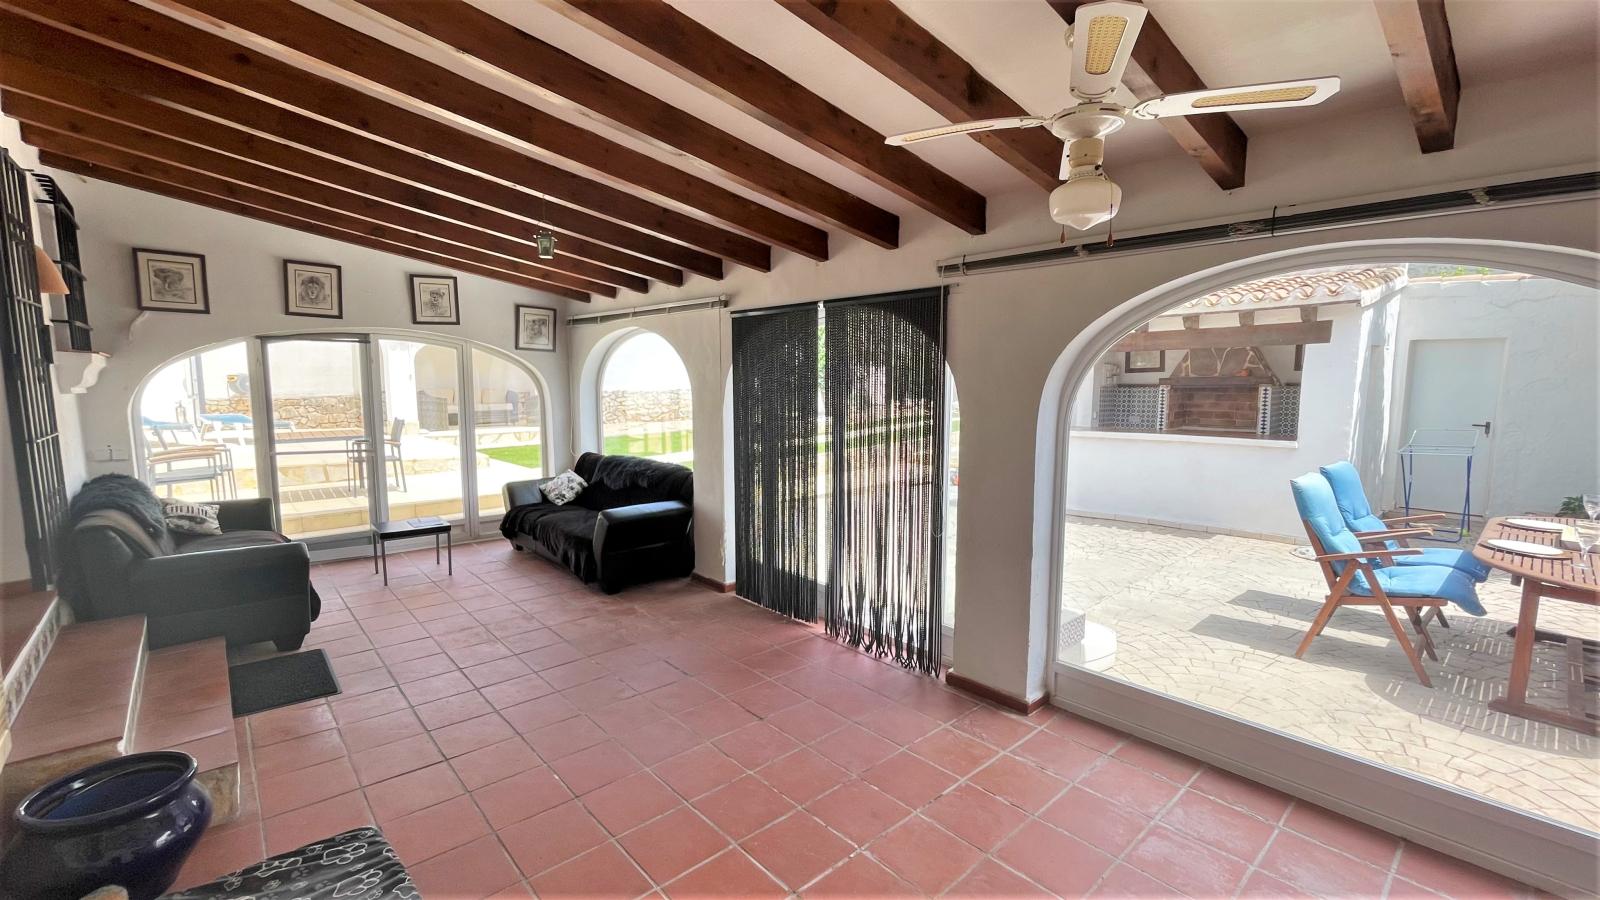 Fantastic villa on Monte Pego with all the extras: Flat plot, guest house, pool, photovoltaic, carport, winter garden, fitness room and much more!